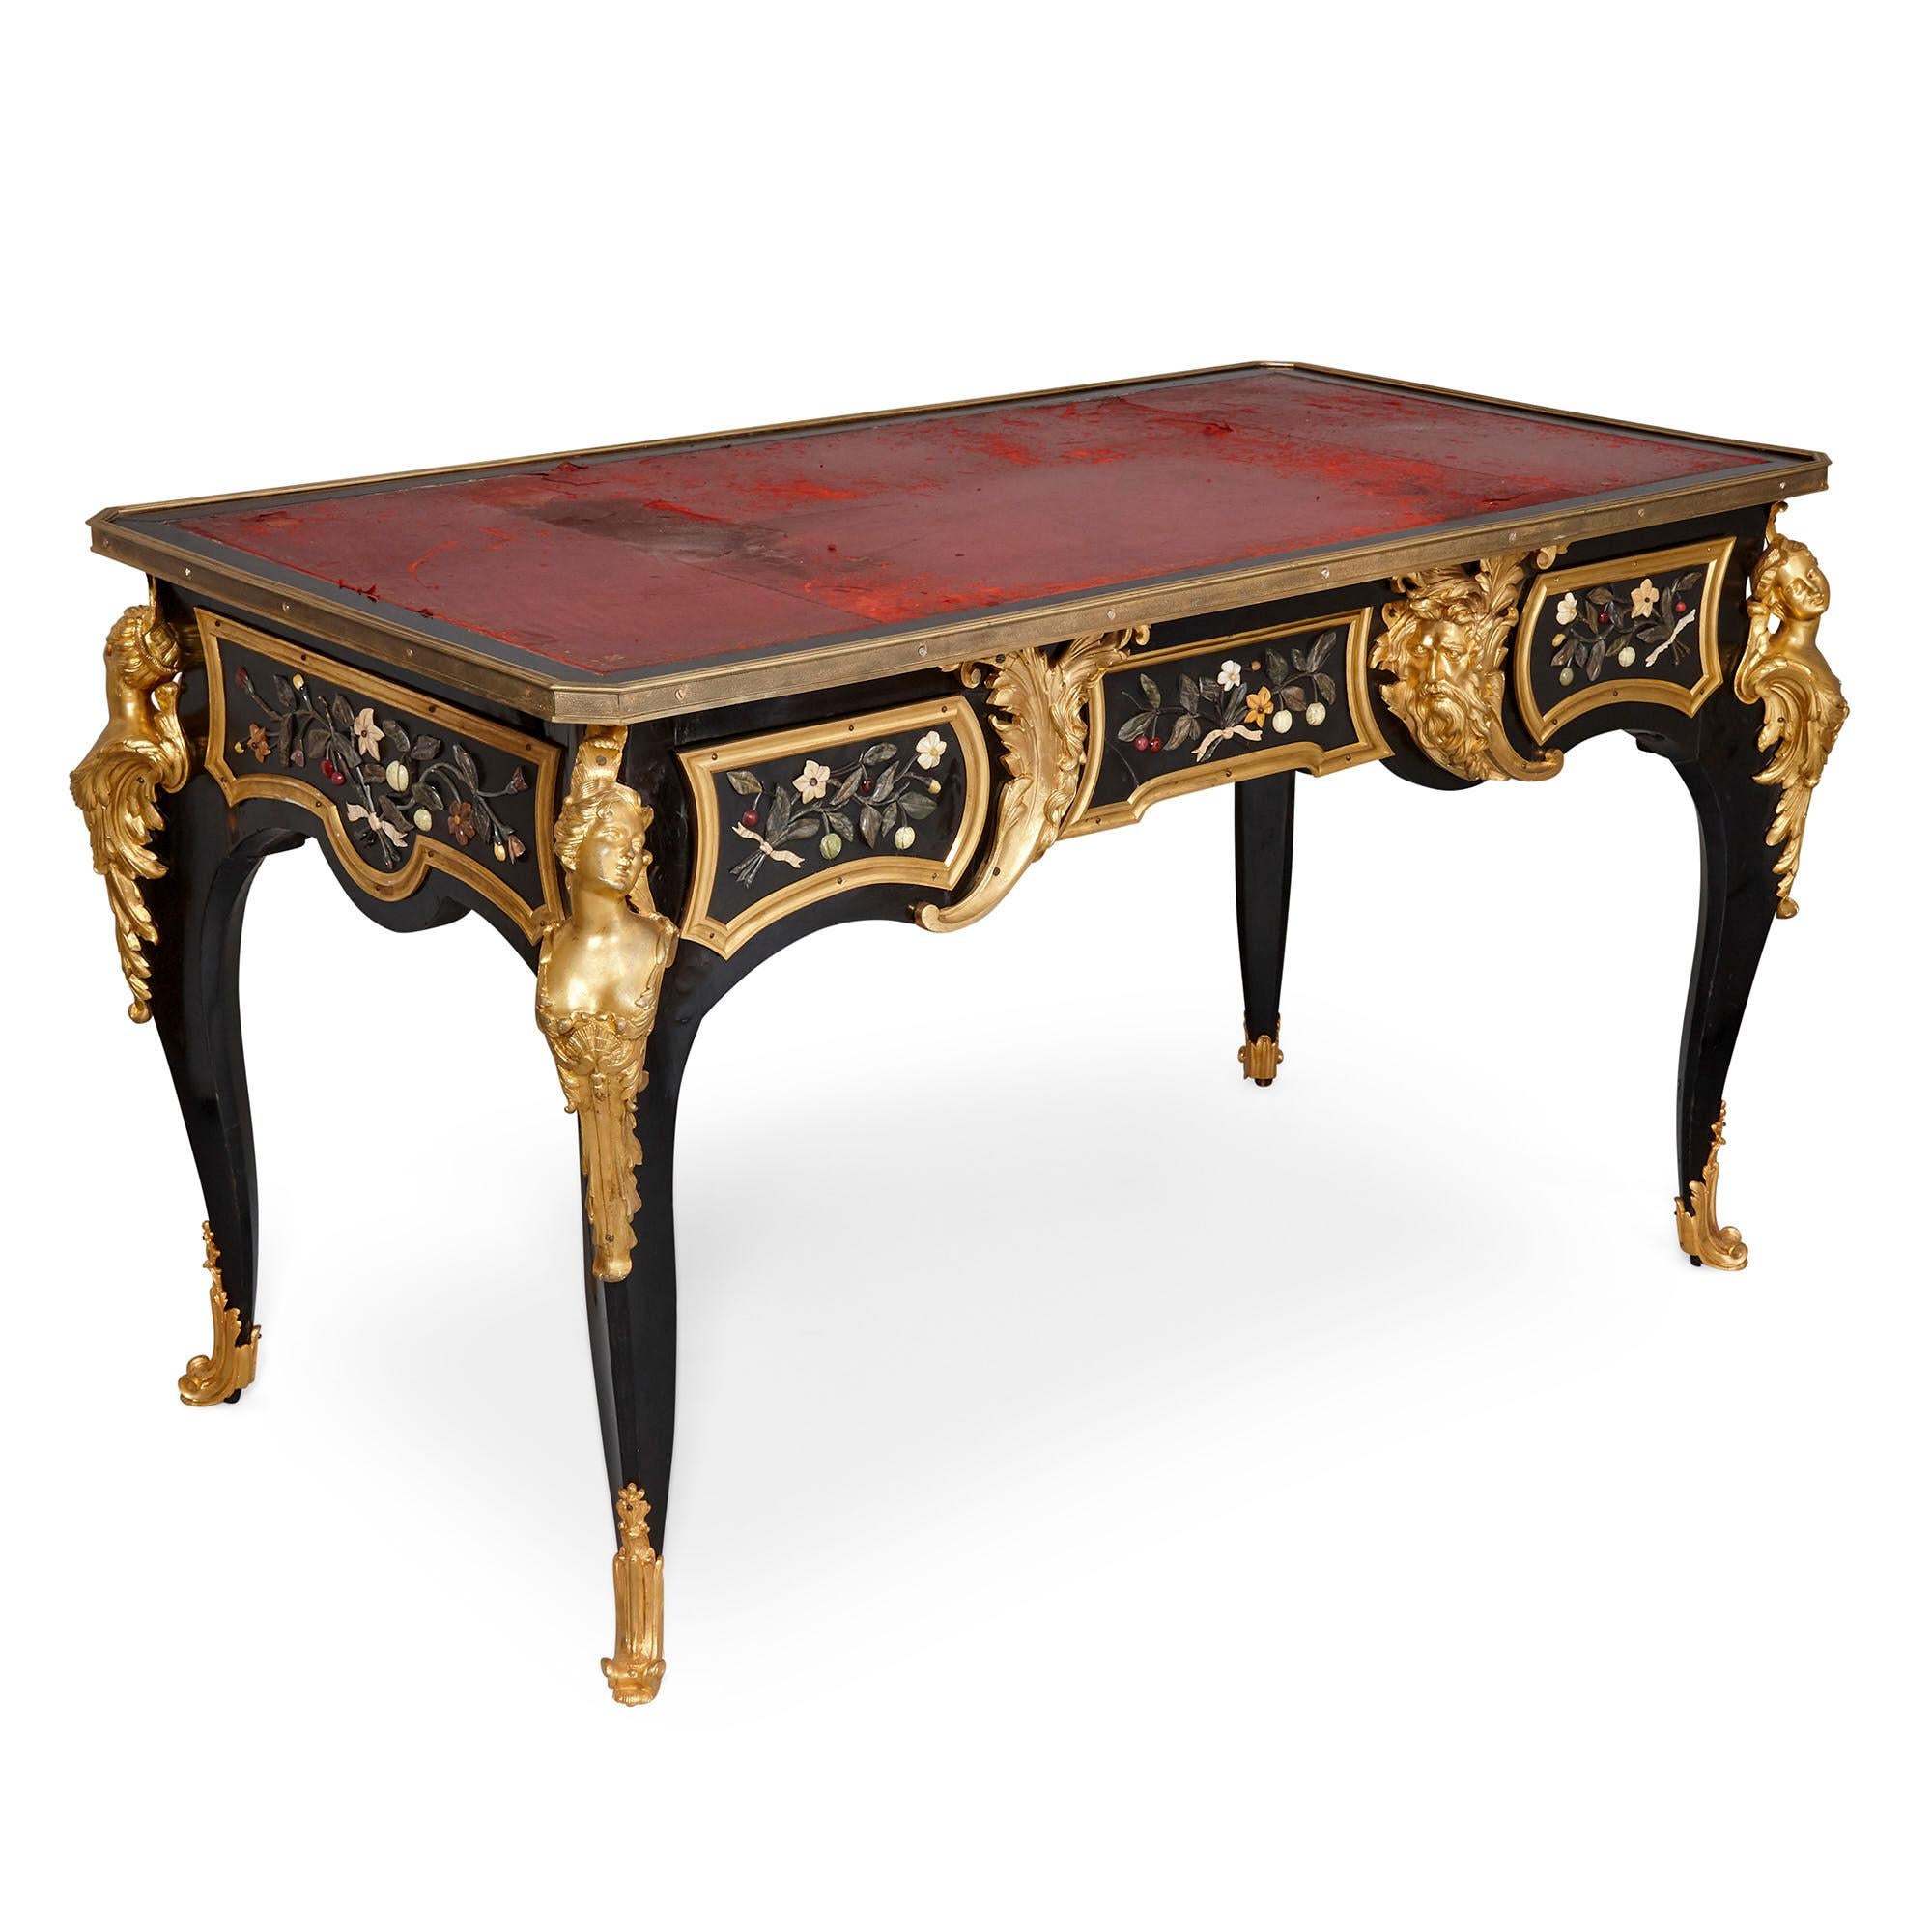 Antique Mid-19th century ebonised wood, gilt bronze and Pietra Dura desk,
French, c. 1860s
Dimensions: Height 77cm, width 134cm, depth 78cm

This Napoleon III period desk features a wonderfully eclectic design, blending together elements of the